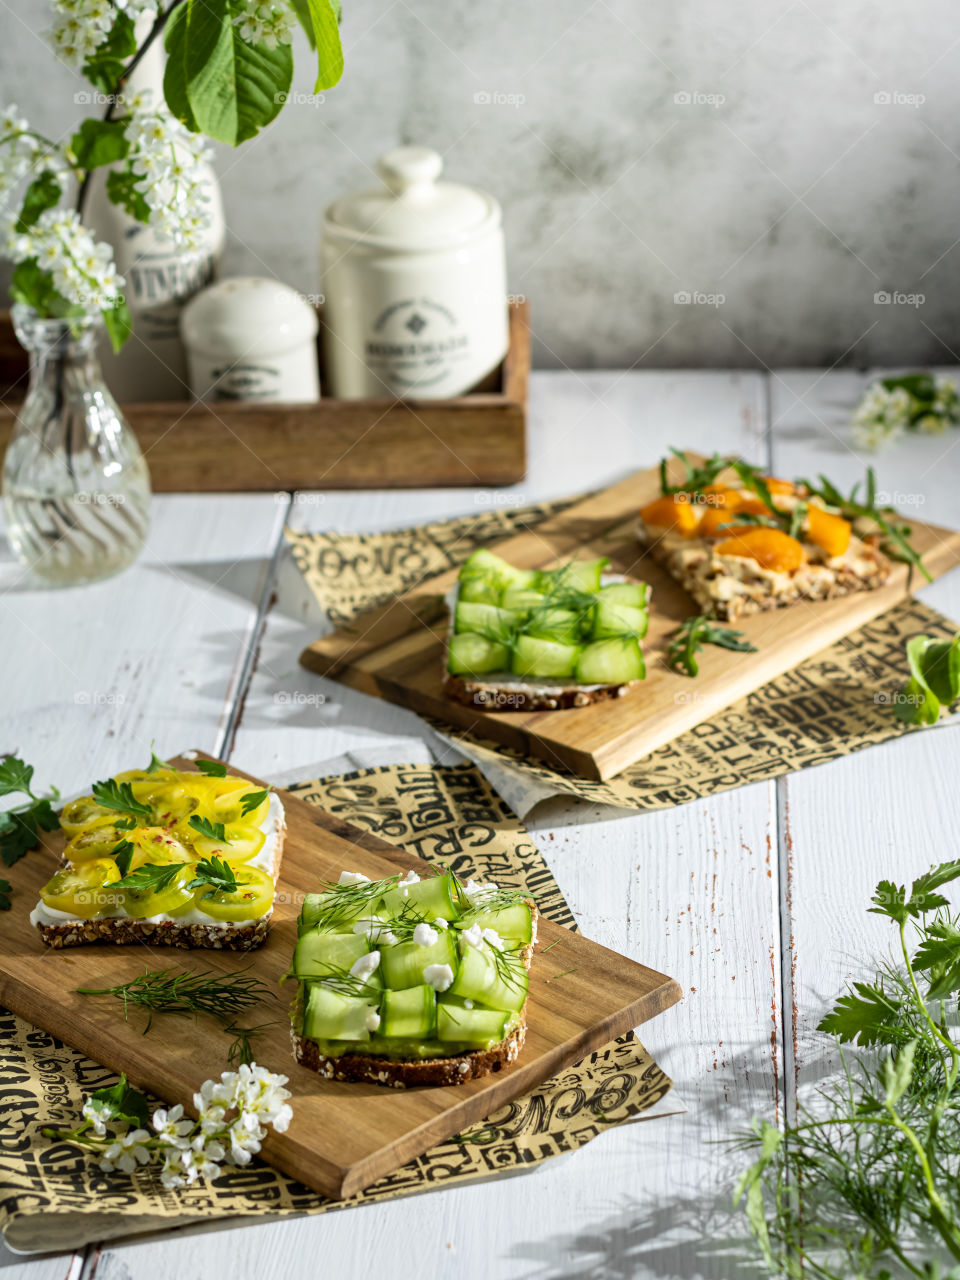 Wholegrain bread slices on wooden boards topped with veggies and herbs